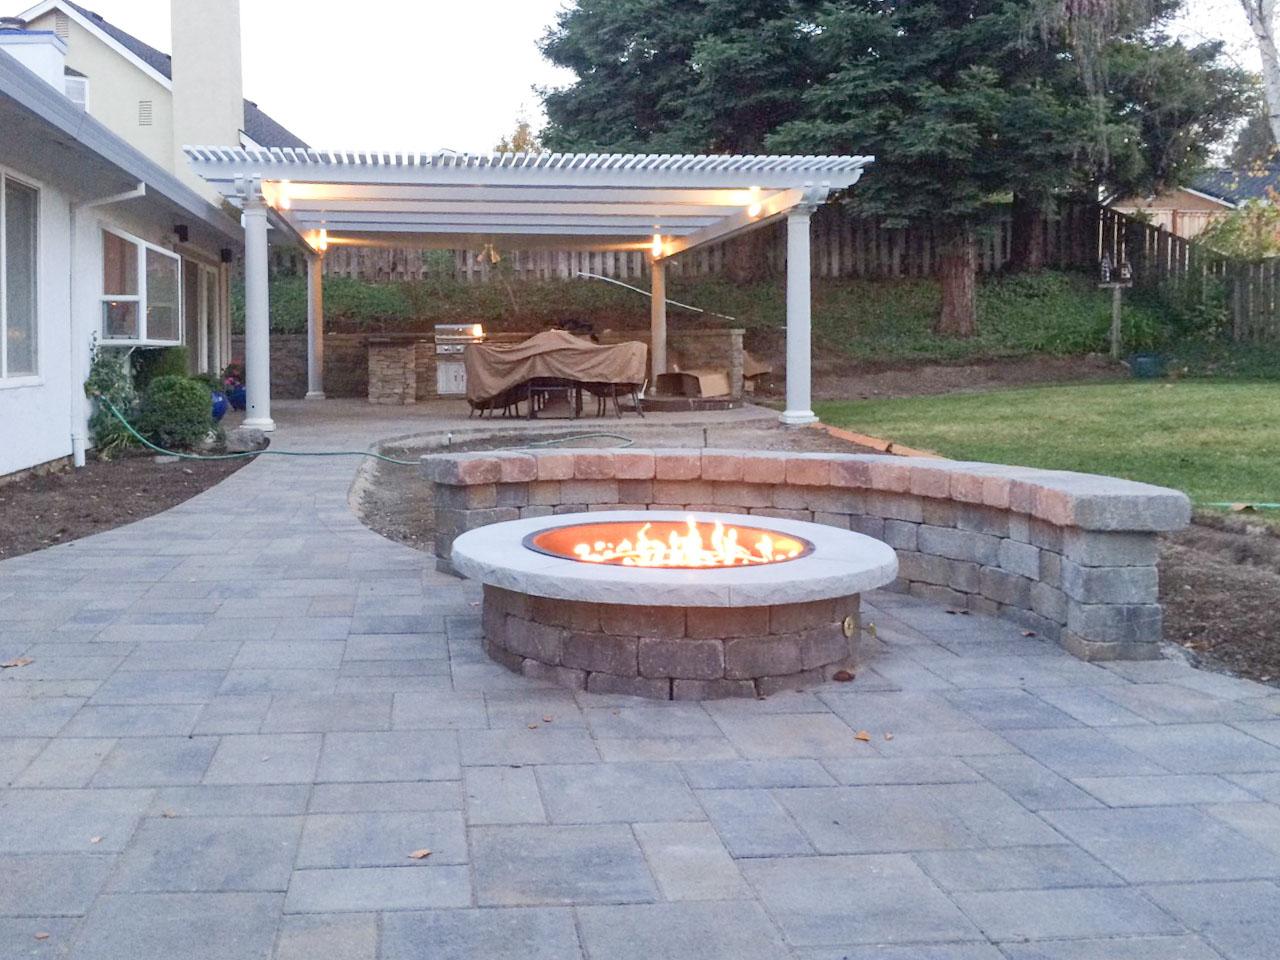 Picture of Mr. Pavers Contractor Services, Inc. - Mr. Pavers Contractor Services, Inc.